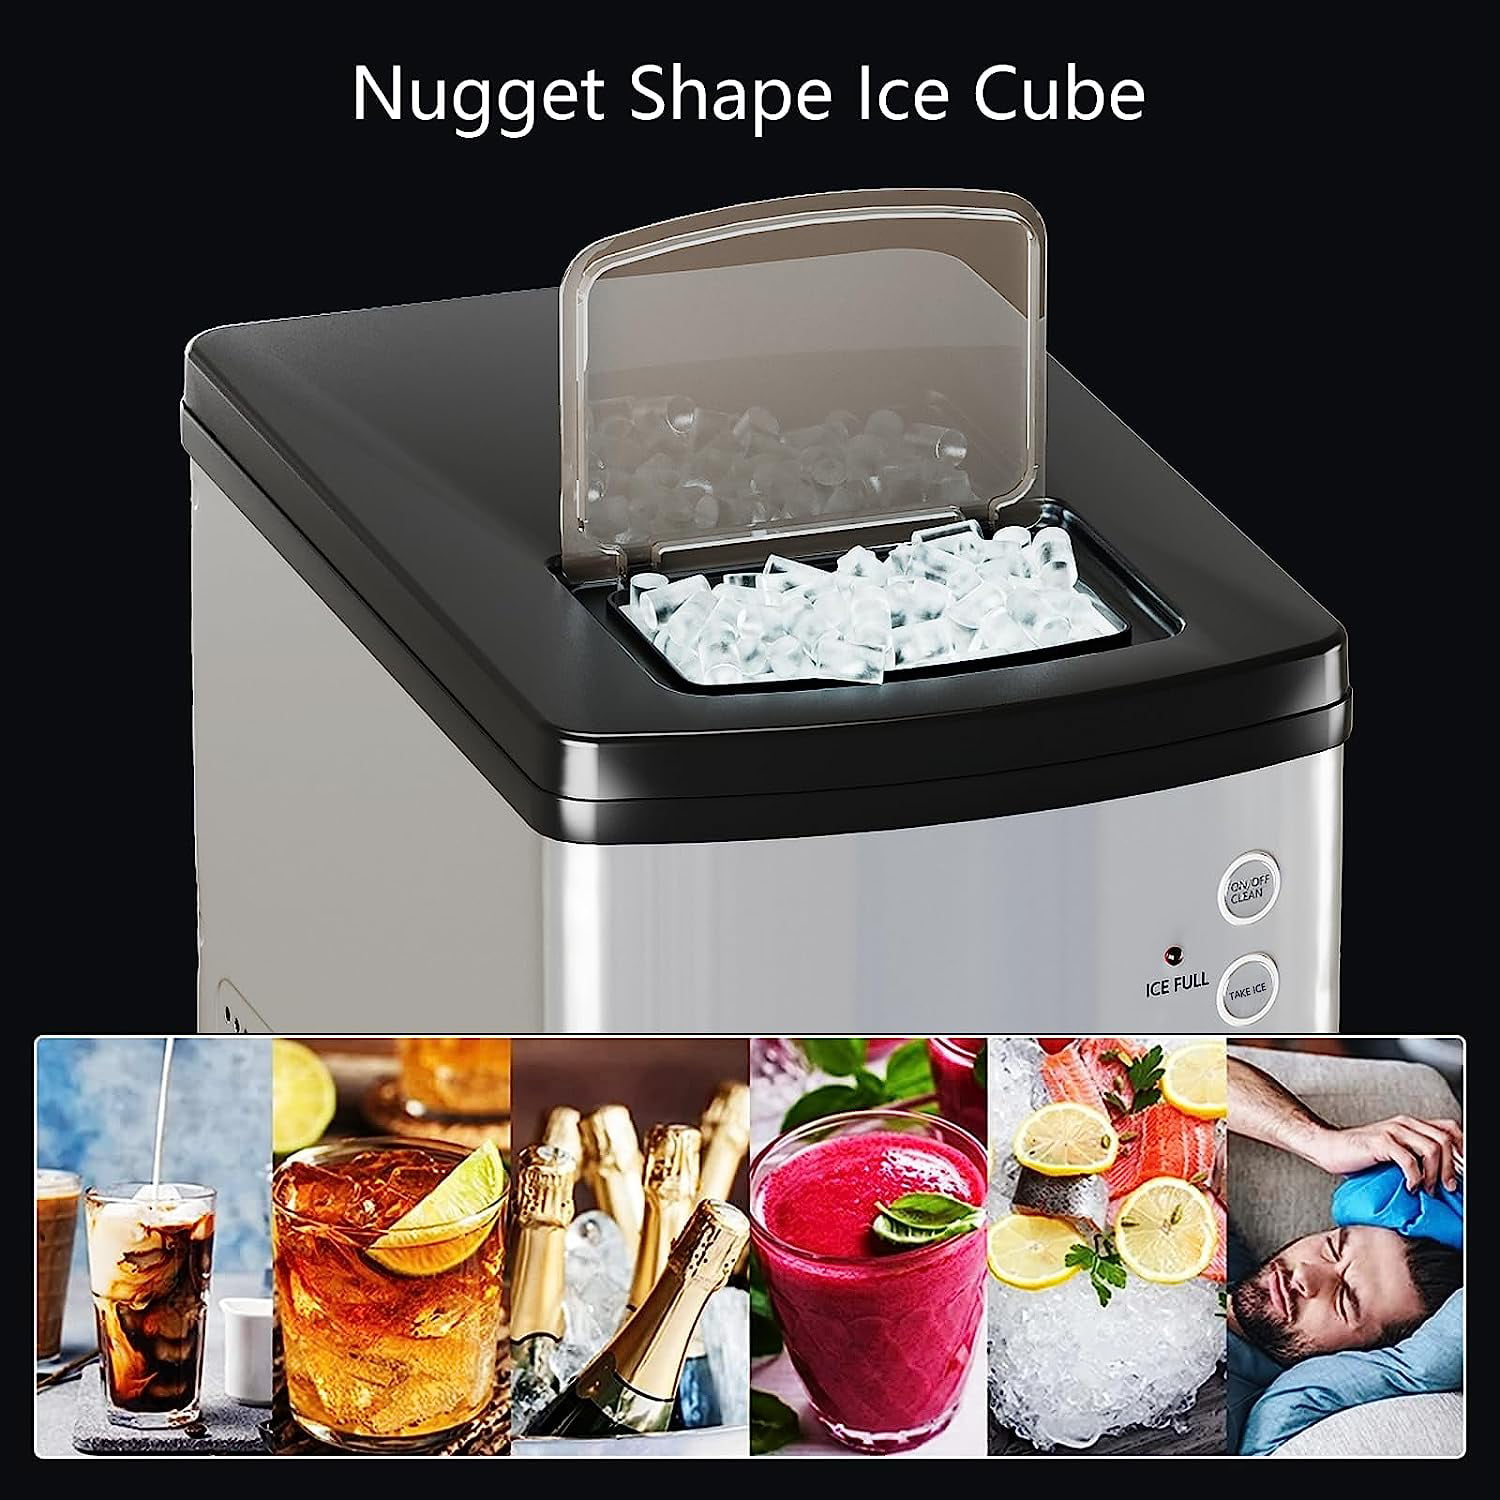  thruudeng Mini Ice Maker Countertop for Home Office Ice Cube  Maker with Ice Basket and Ice Scoop, Portable Ice Makers Machine for Magic  Bullet Ice Cube, Small Ice Maker Nugget with